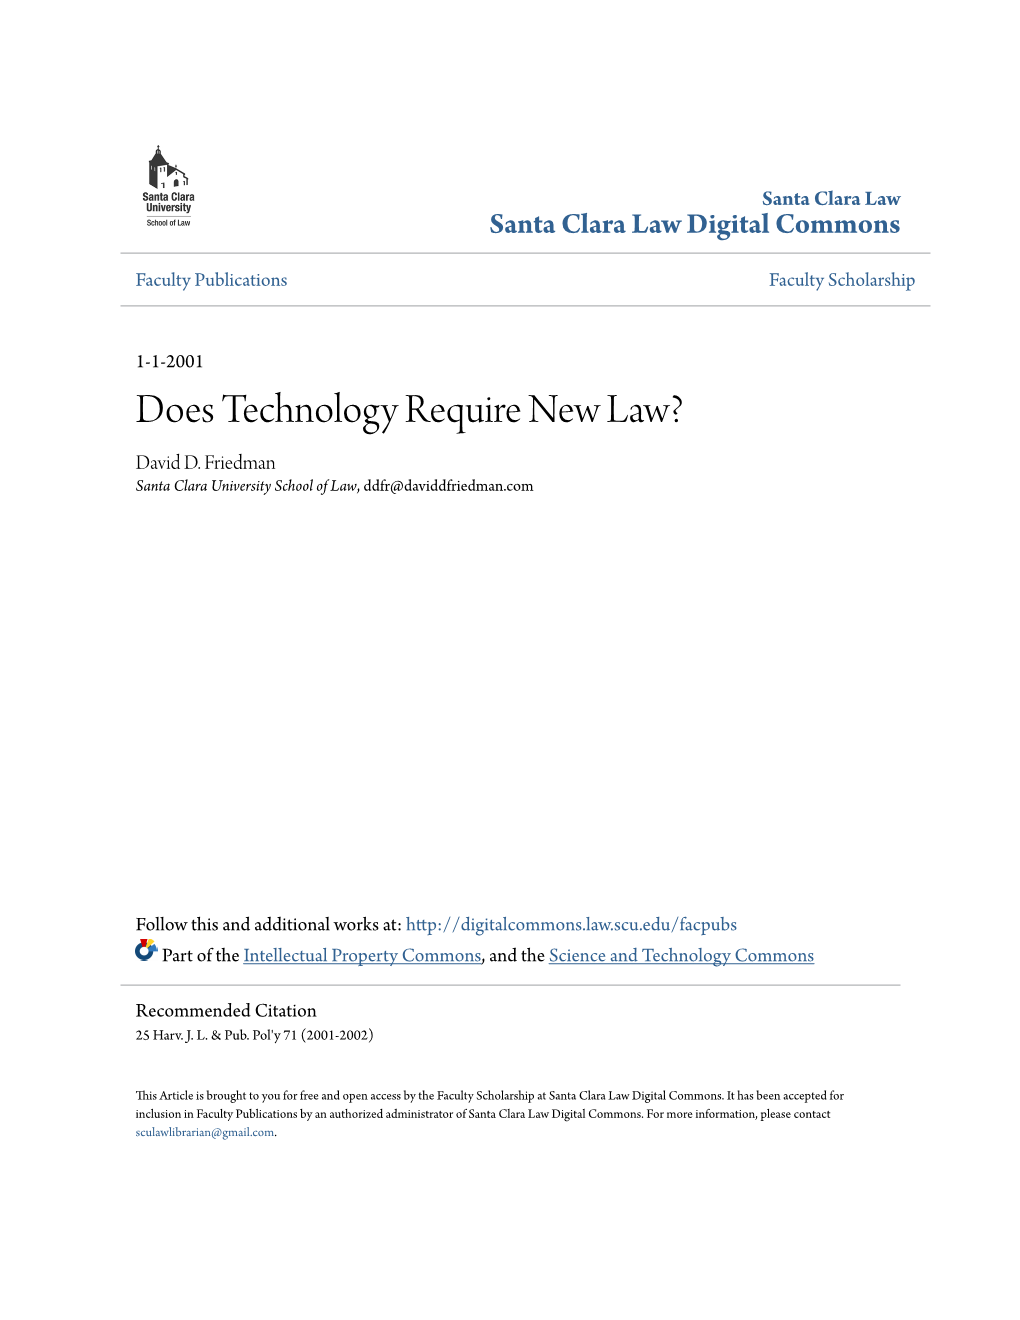 Does Technology Require New Law? David D